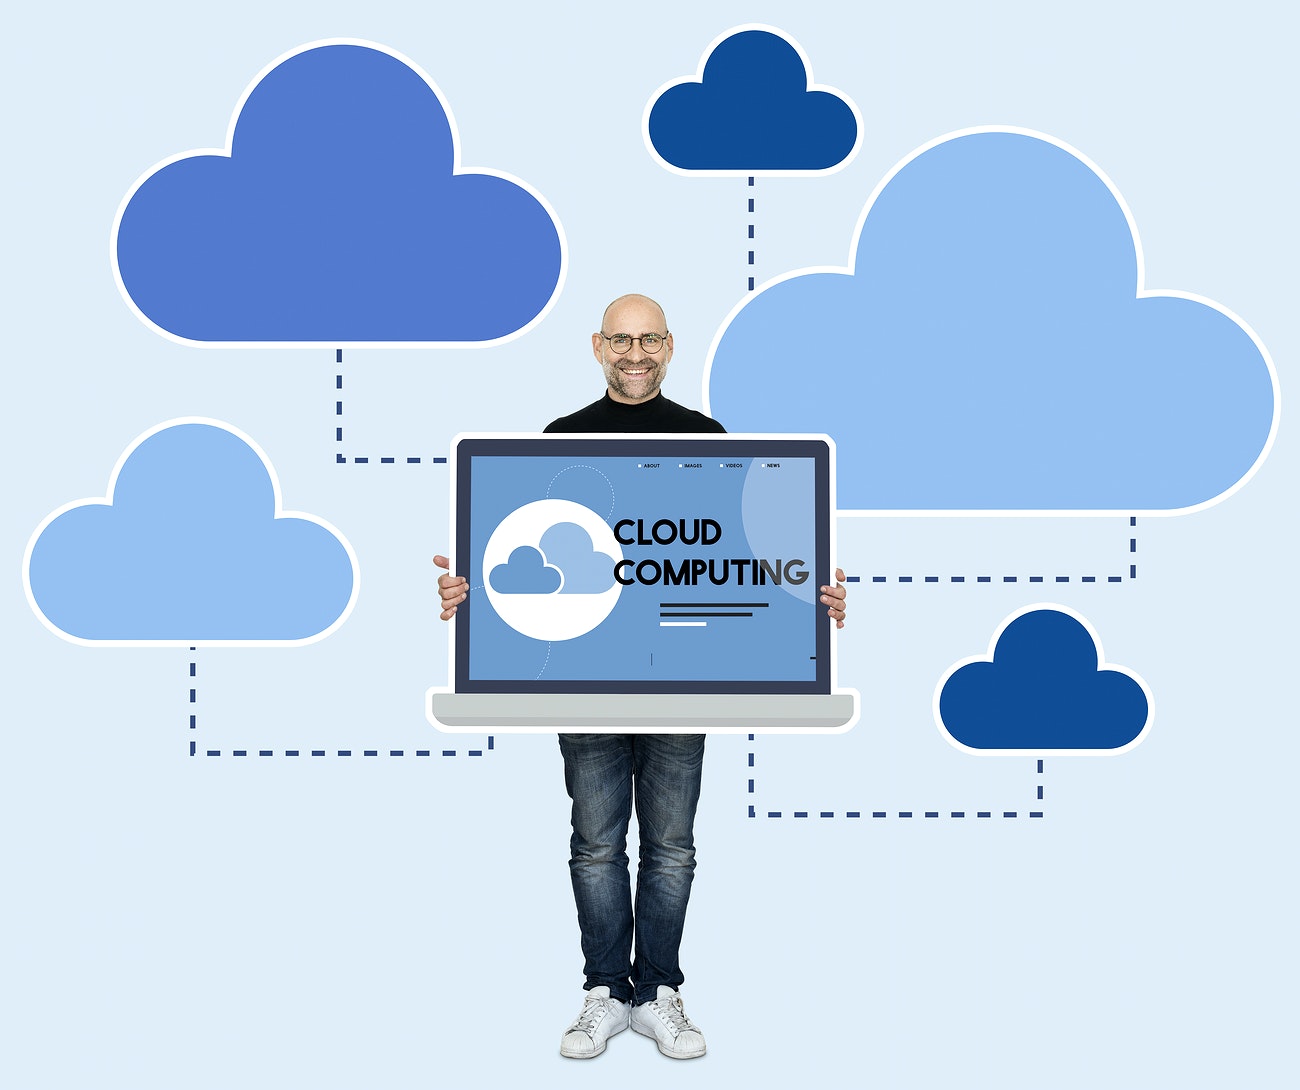 How To Make The Transition To A Cloud Career If You Don't Have Any Previous Experience?